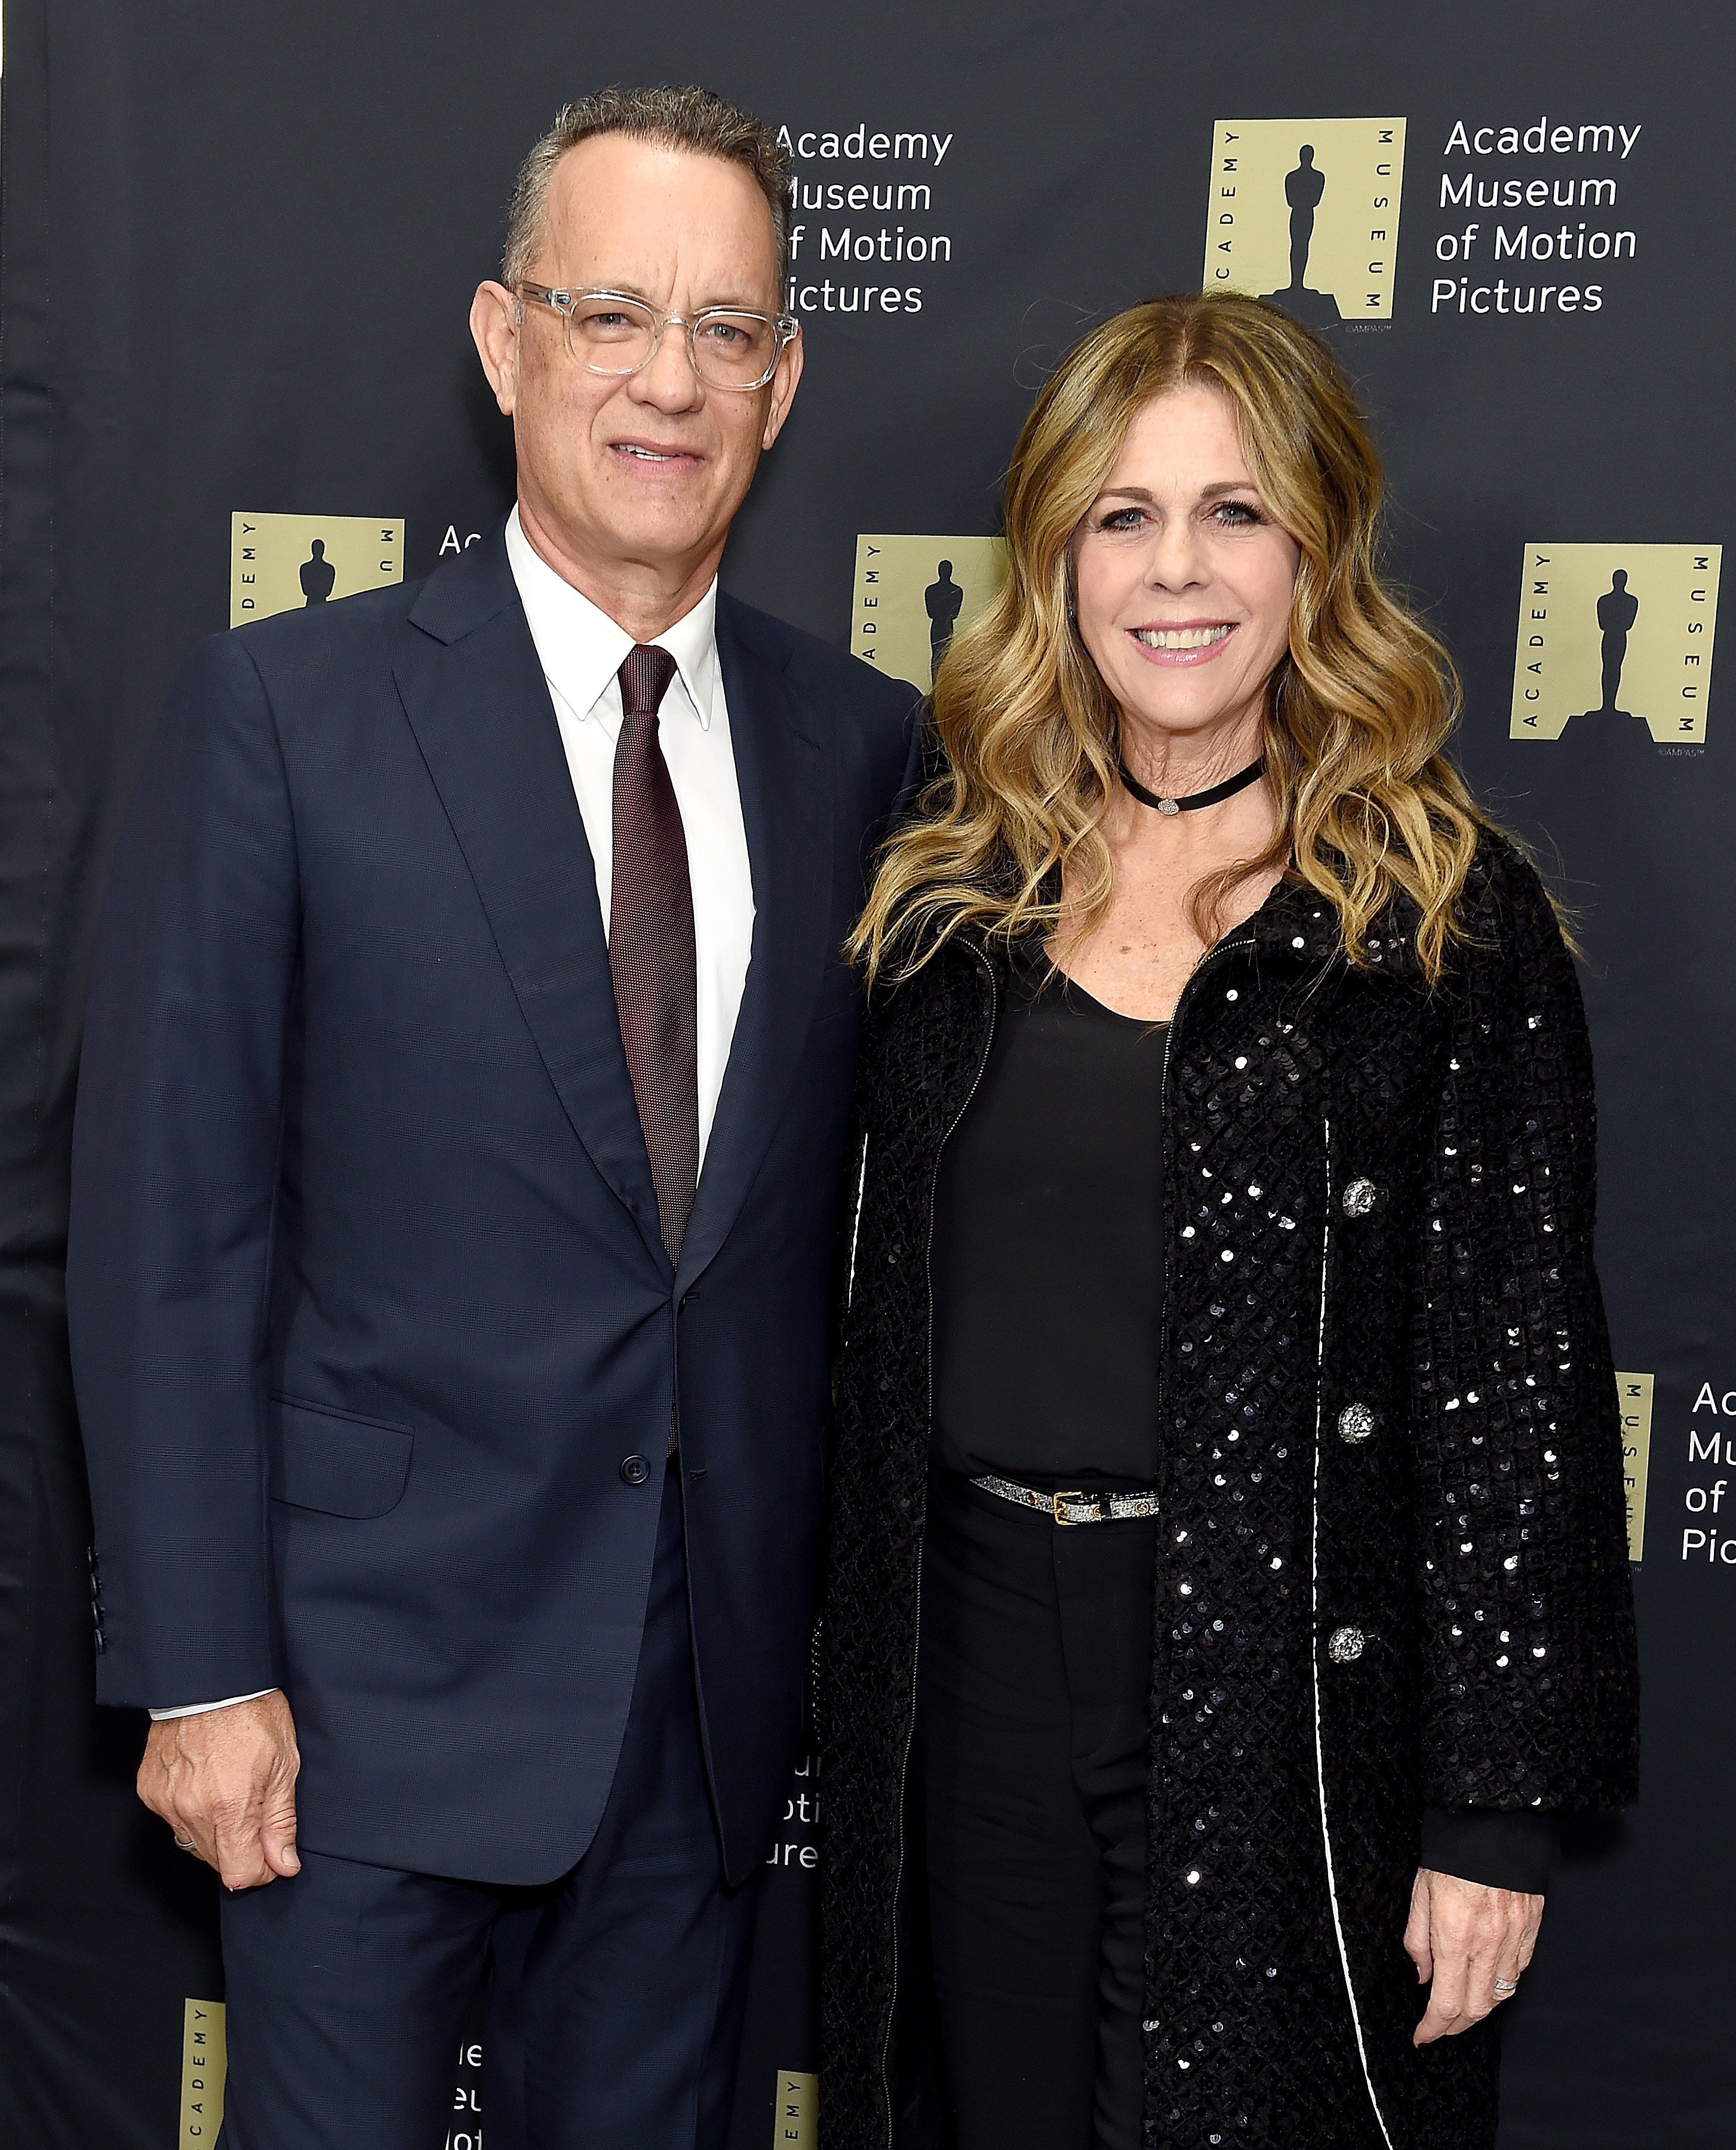 Tom Hanks and Rita Wilson attend the Academy Museum of Motion Pictures Unveiling of the Fully Restored Saban Building in Los Angeles, California on December 4, 2018 | Photo: Getty Images